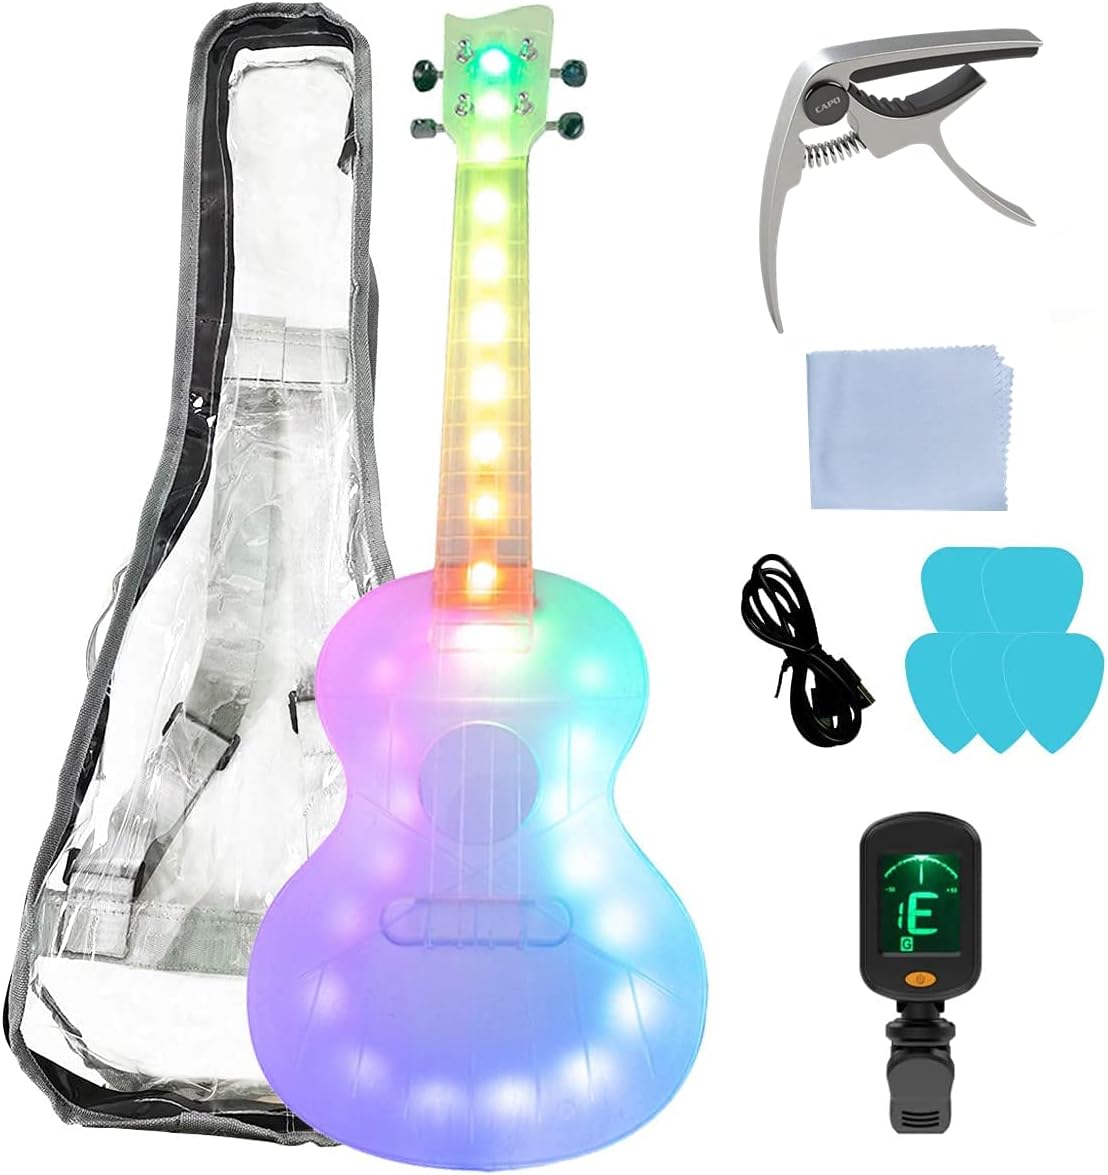 Led Ukulele 23 inches USB Charging Christmas Birthday Gift for Kids Beginners Music Lovers AUPHY